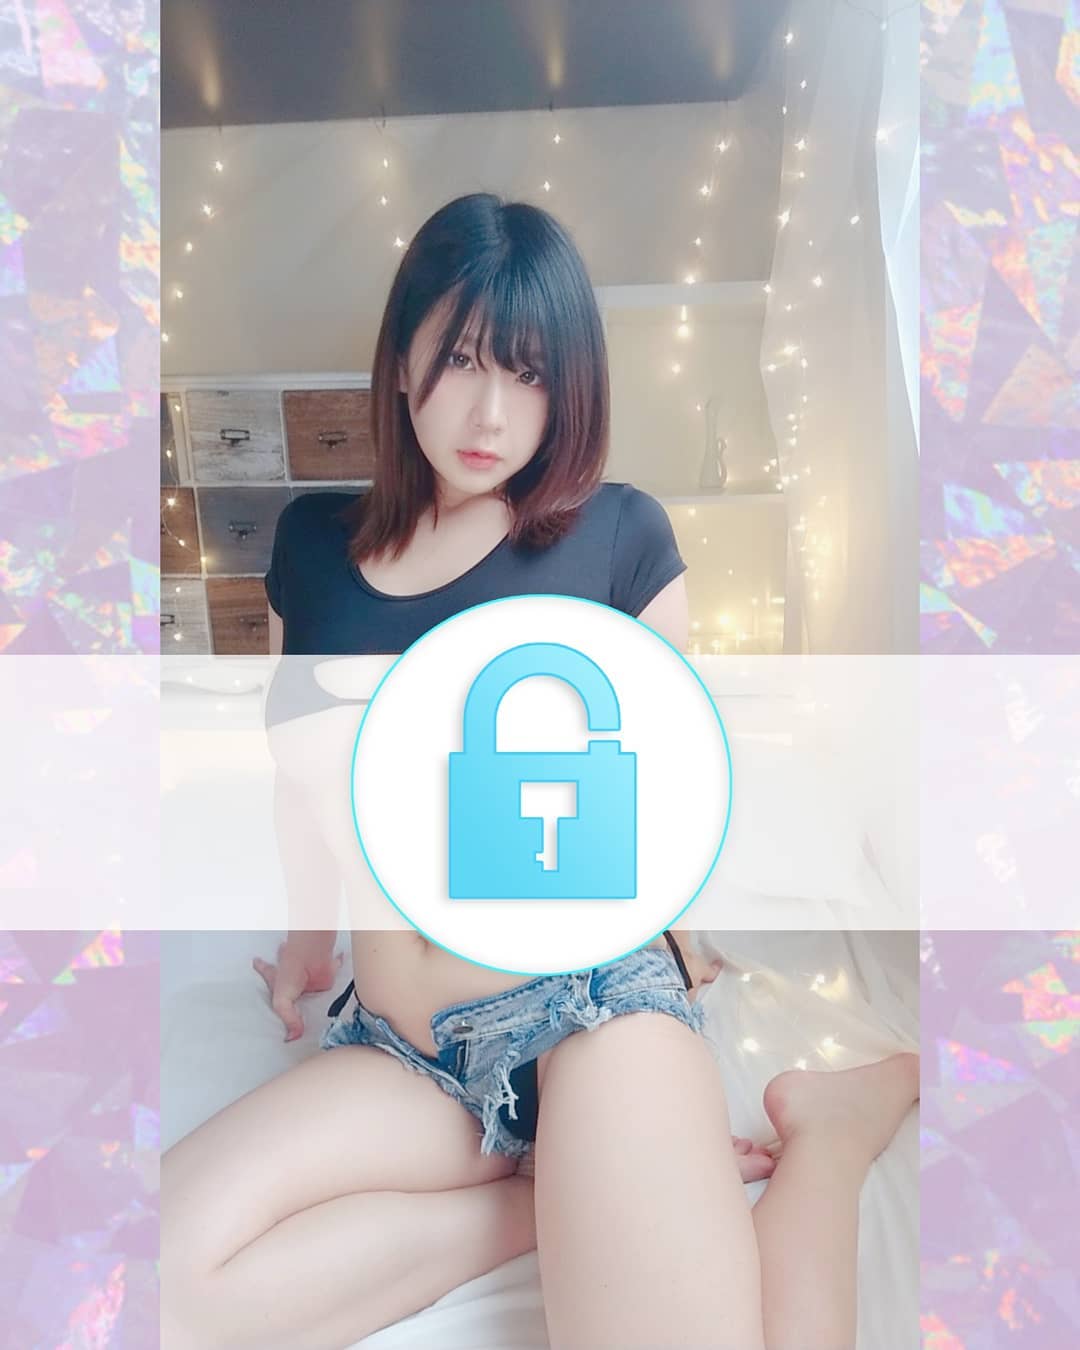  Join patreon now to unlock more